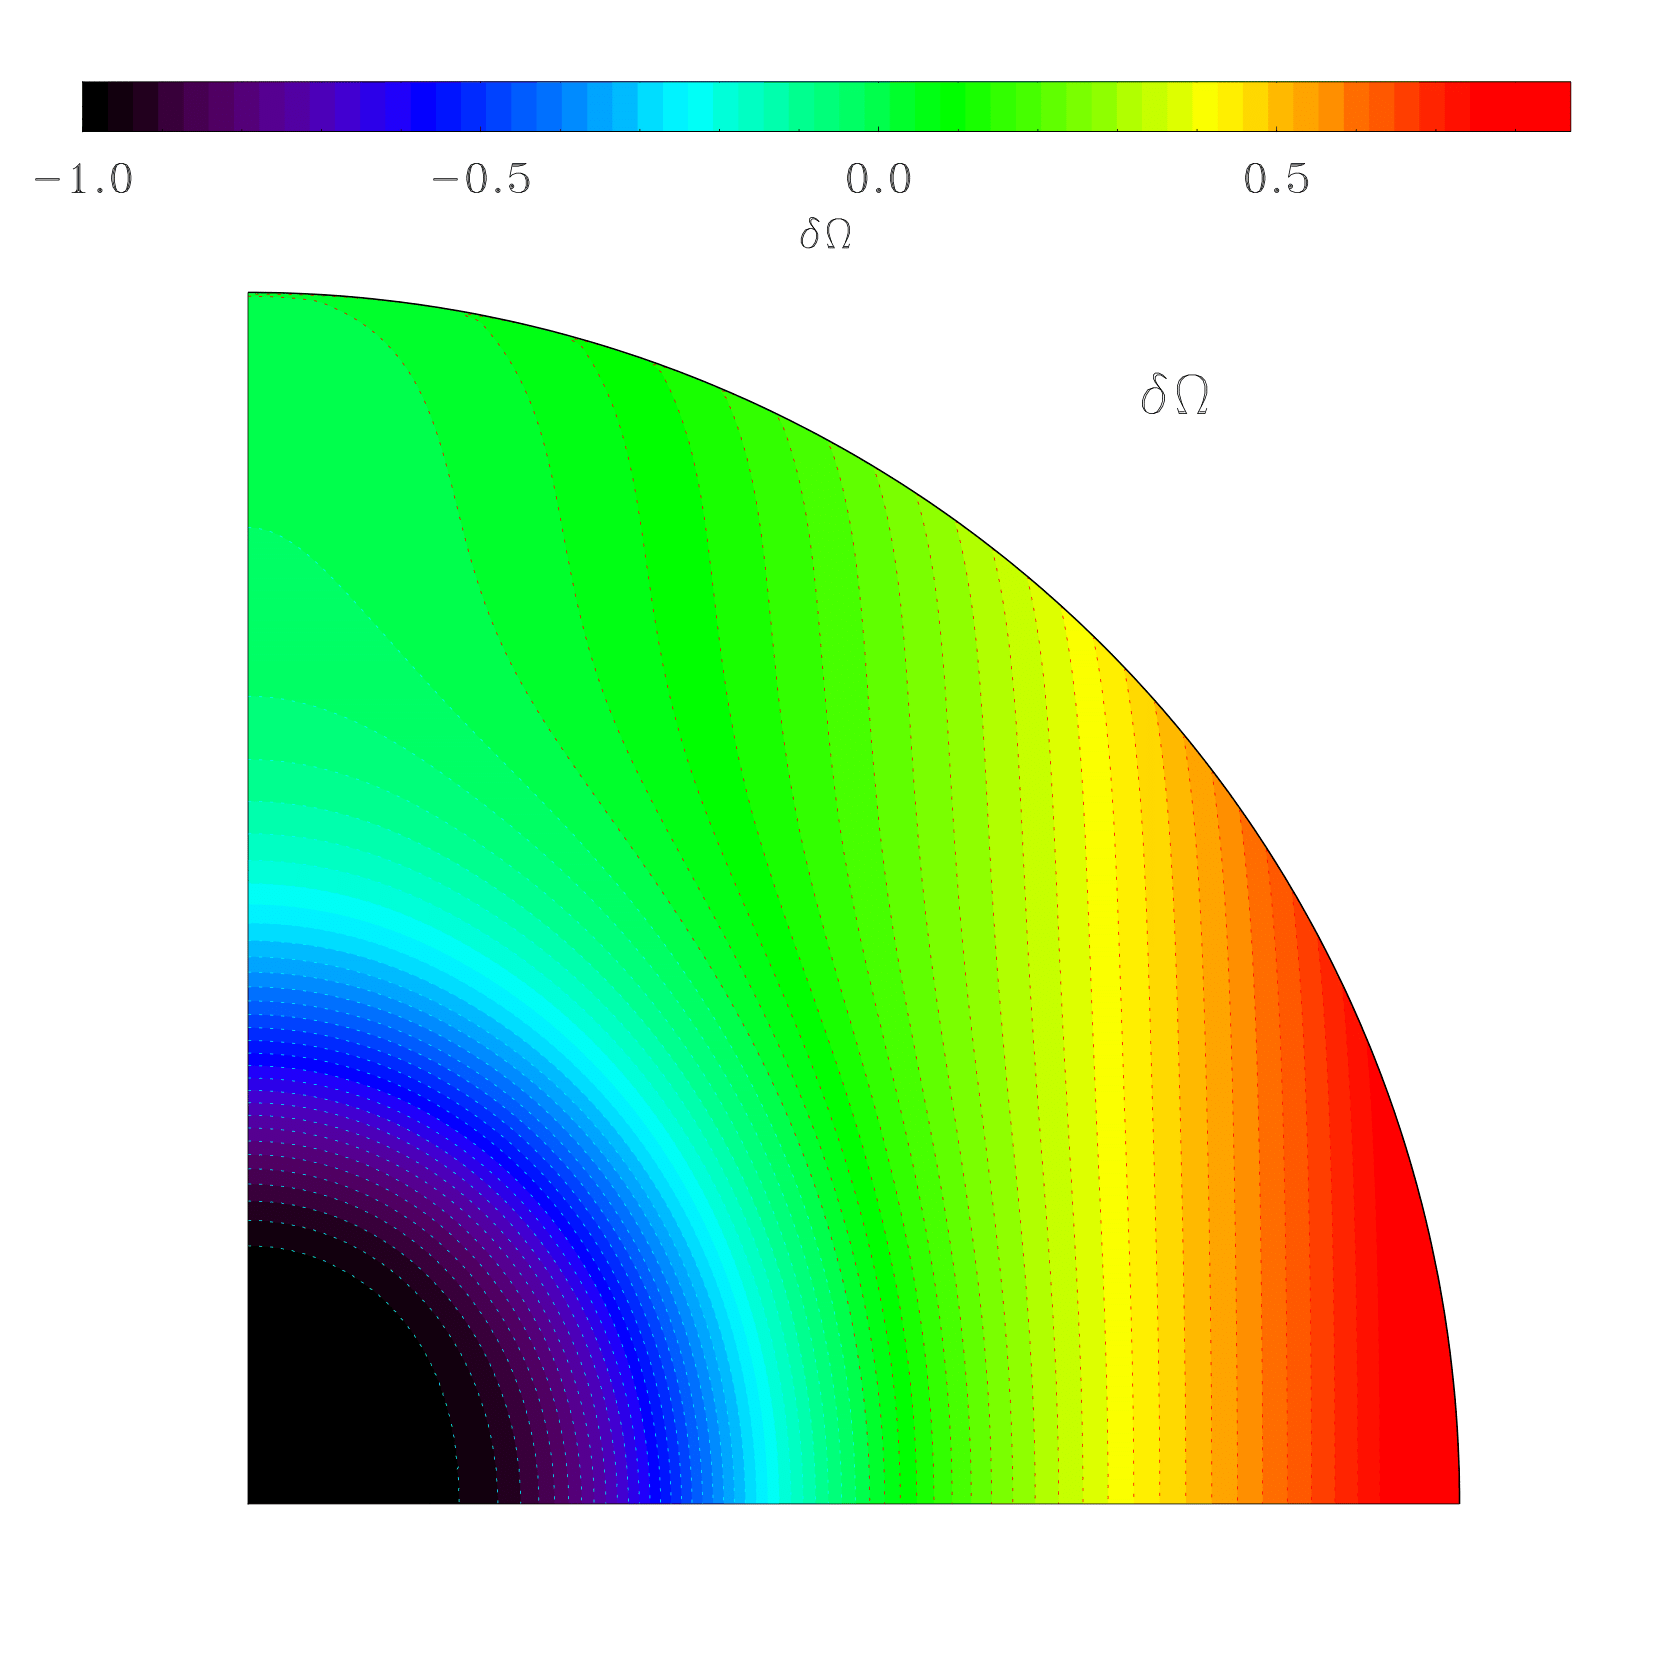 Differential rotation in the radiative zone